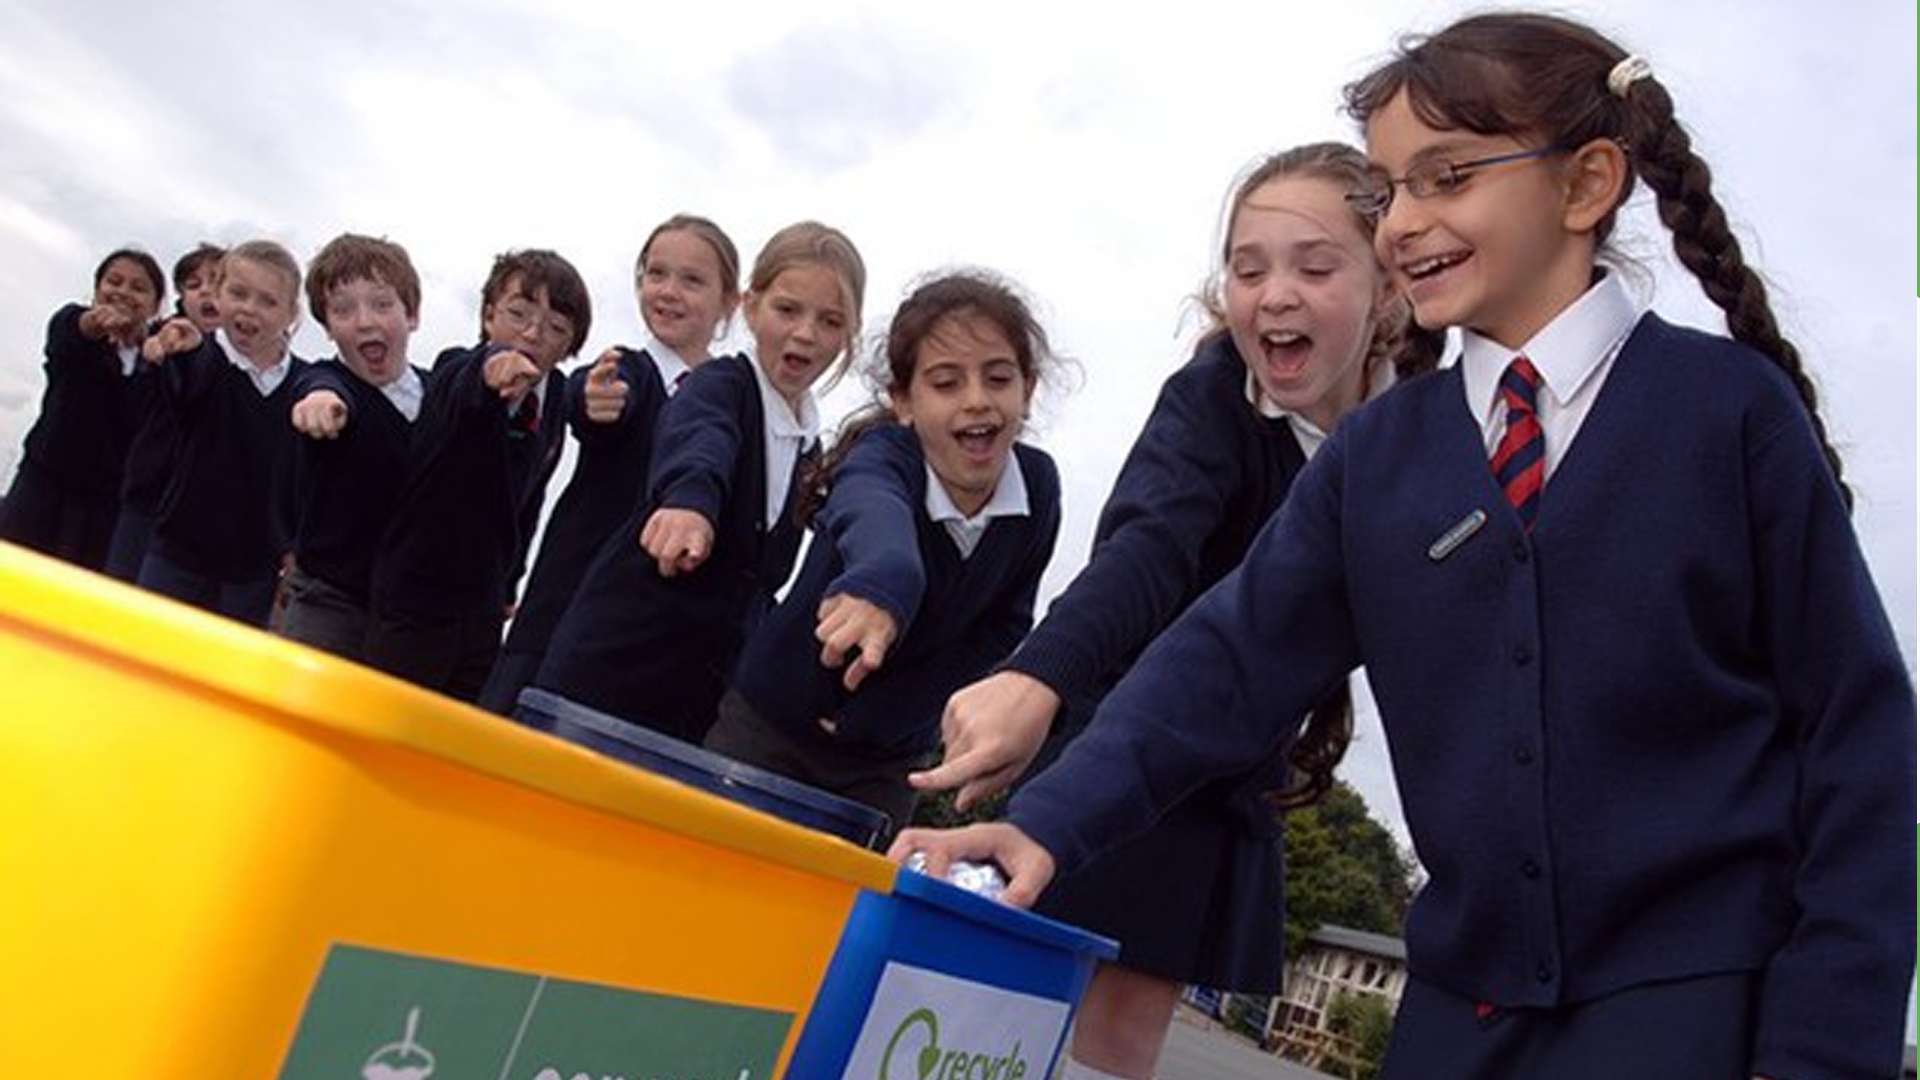 A group of school children standing over and pointing to a recycling bin